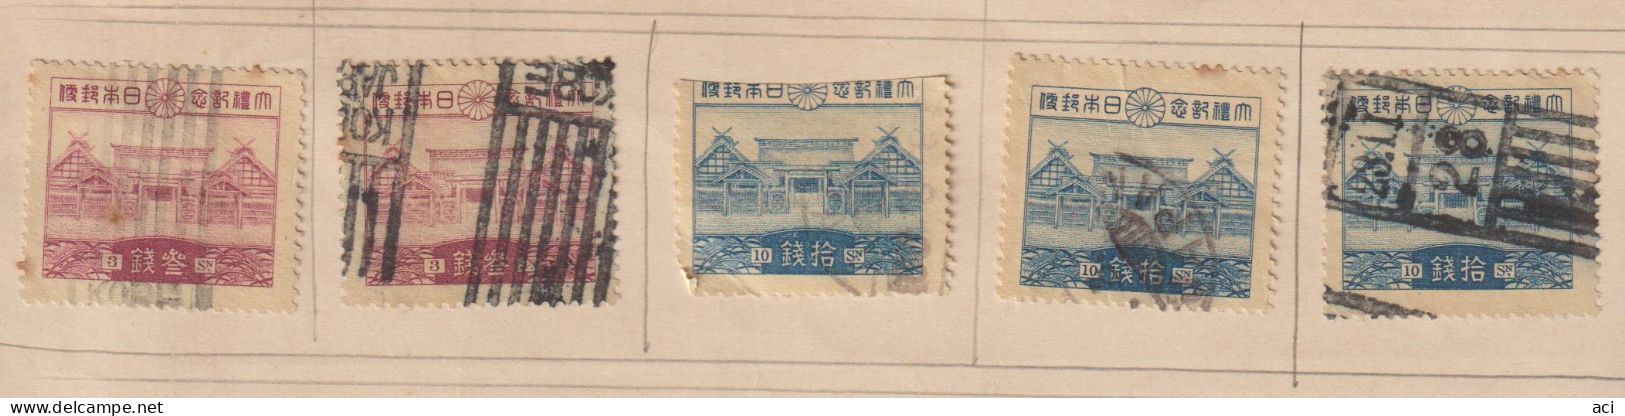 Japan 1928  4 Used Stamps. - Used Stamps